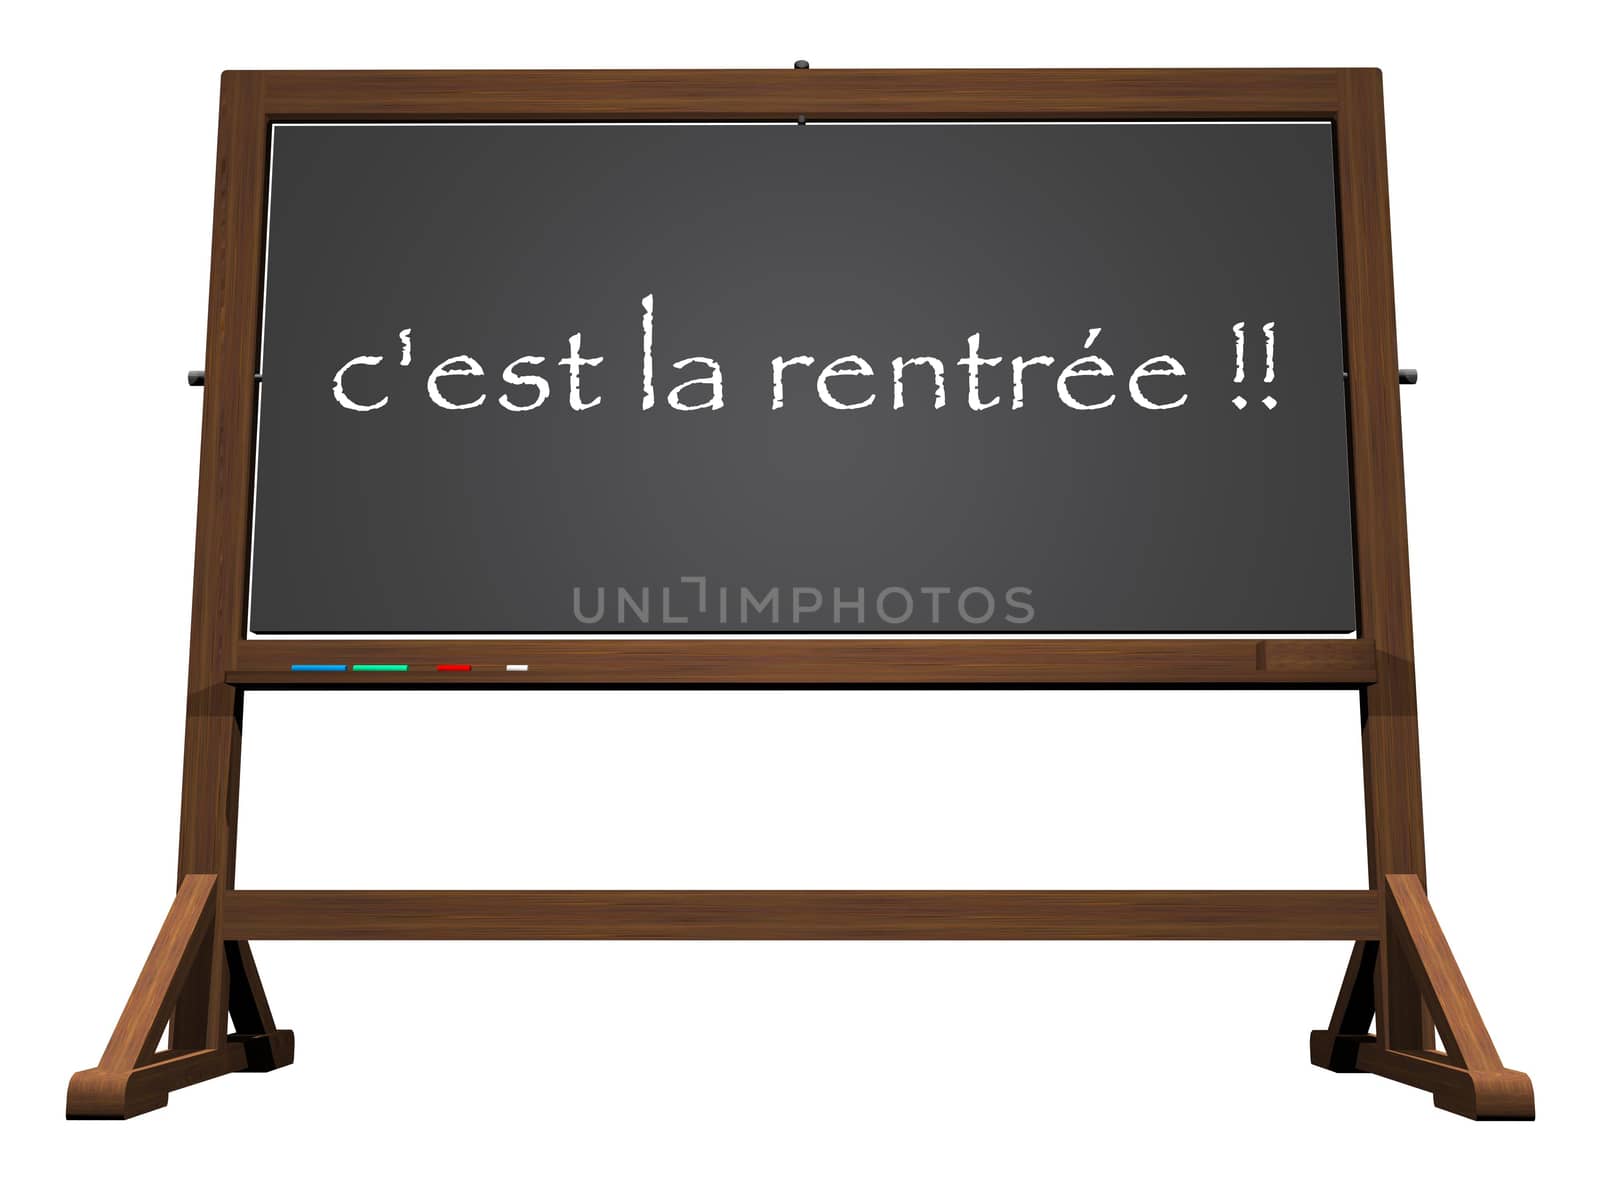 School blackboard french back to school isolated in white background - 3D render